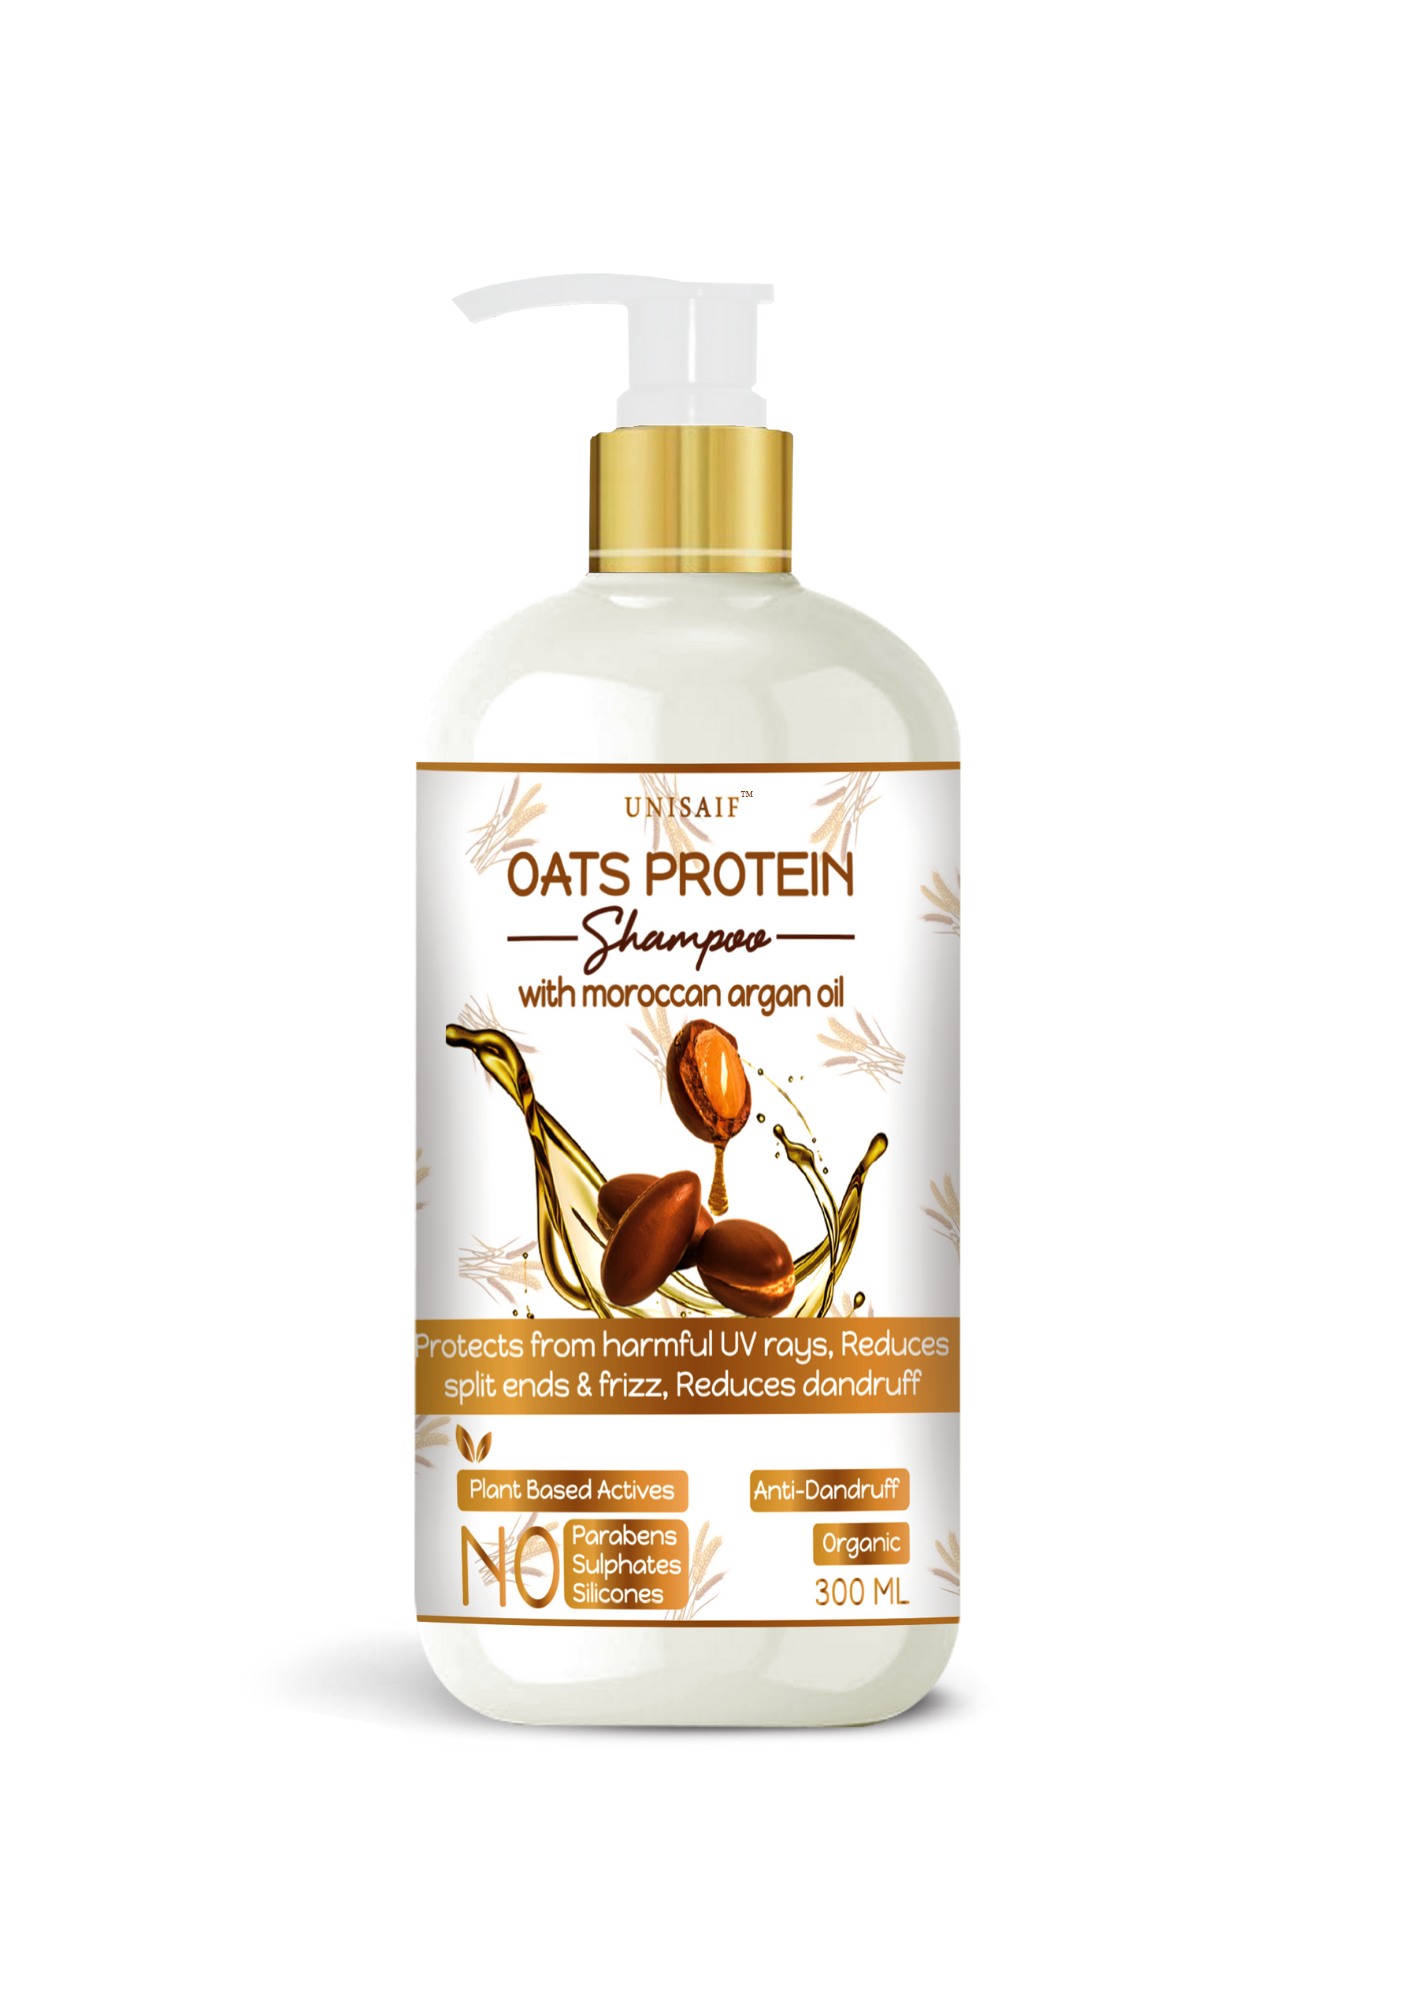 Oats Protein Organic Shampoo (300ml) With Moroccan Argan Oil For Split Ends & Frizz Control | Strengthening | Damage Repair | NO SULPHATE NO PARABEN